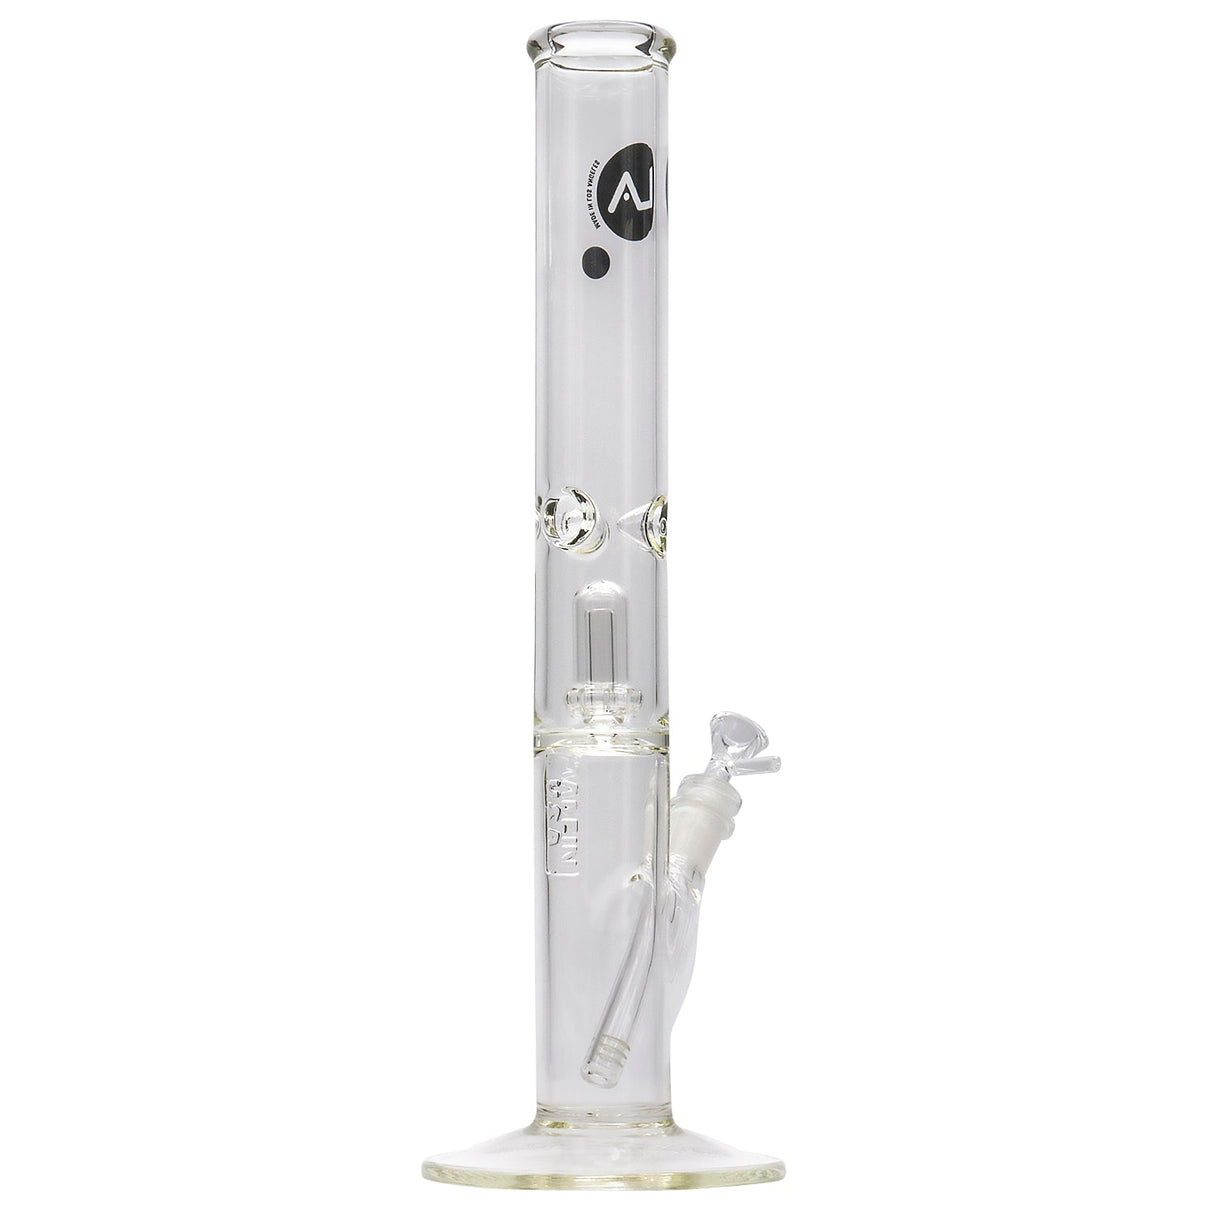 LA Pipes Thick Glass Bong with Showerhead Perc, Front View on White Background